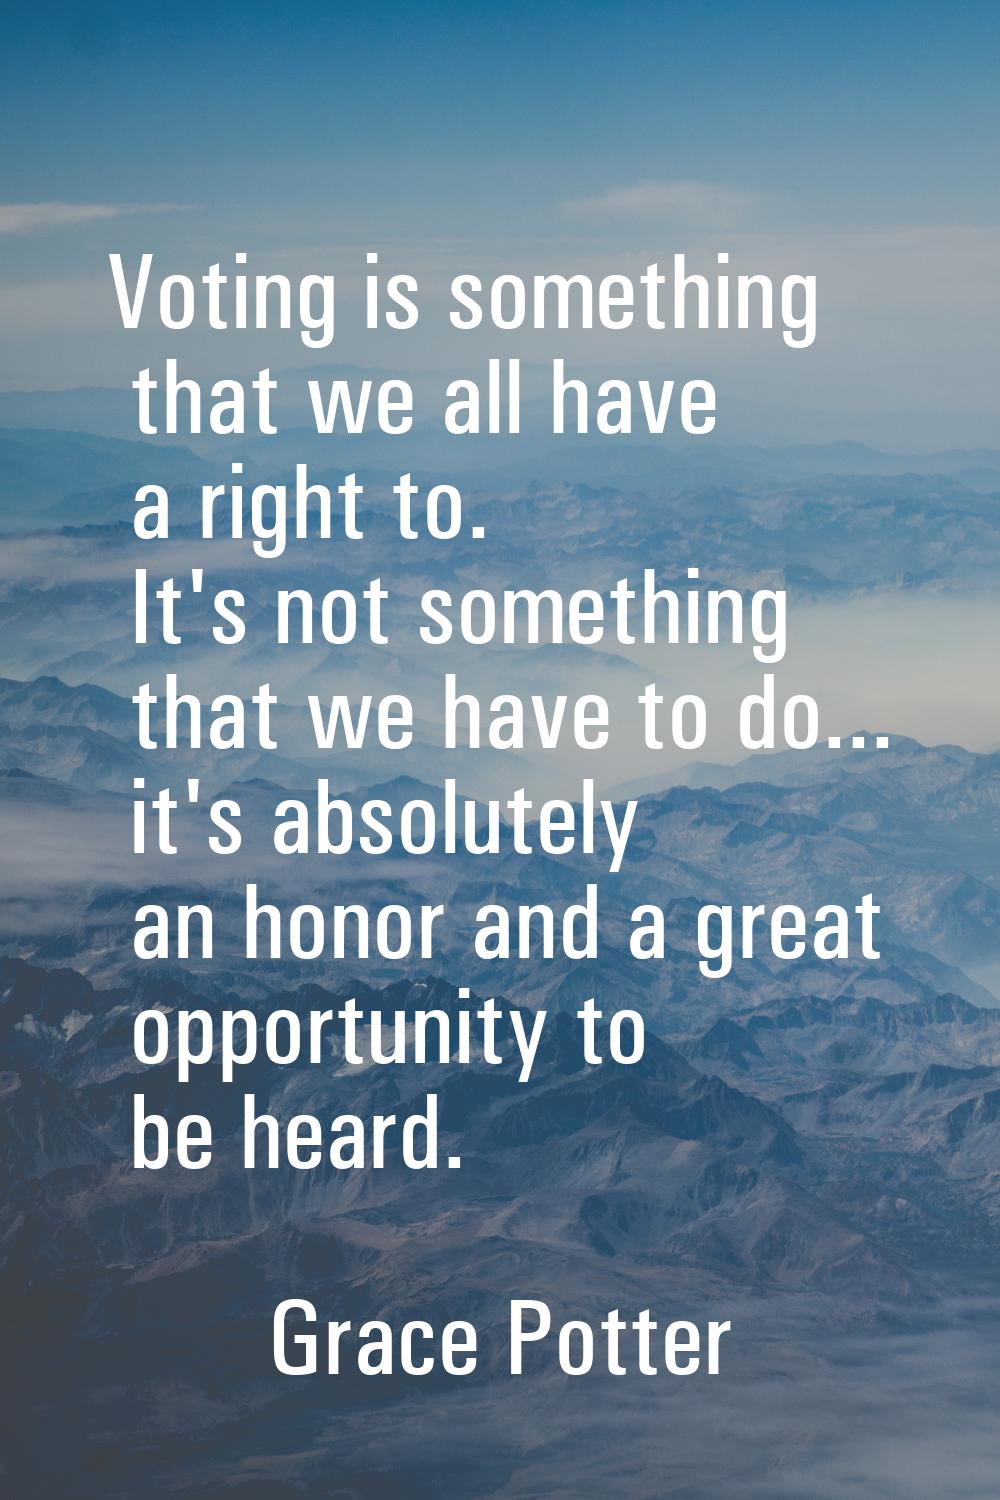 Voting is something that we all have a right to. It's not something that we have to do... it's abso